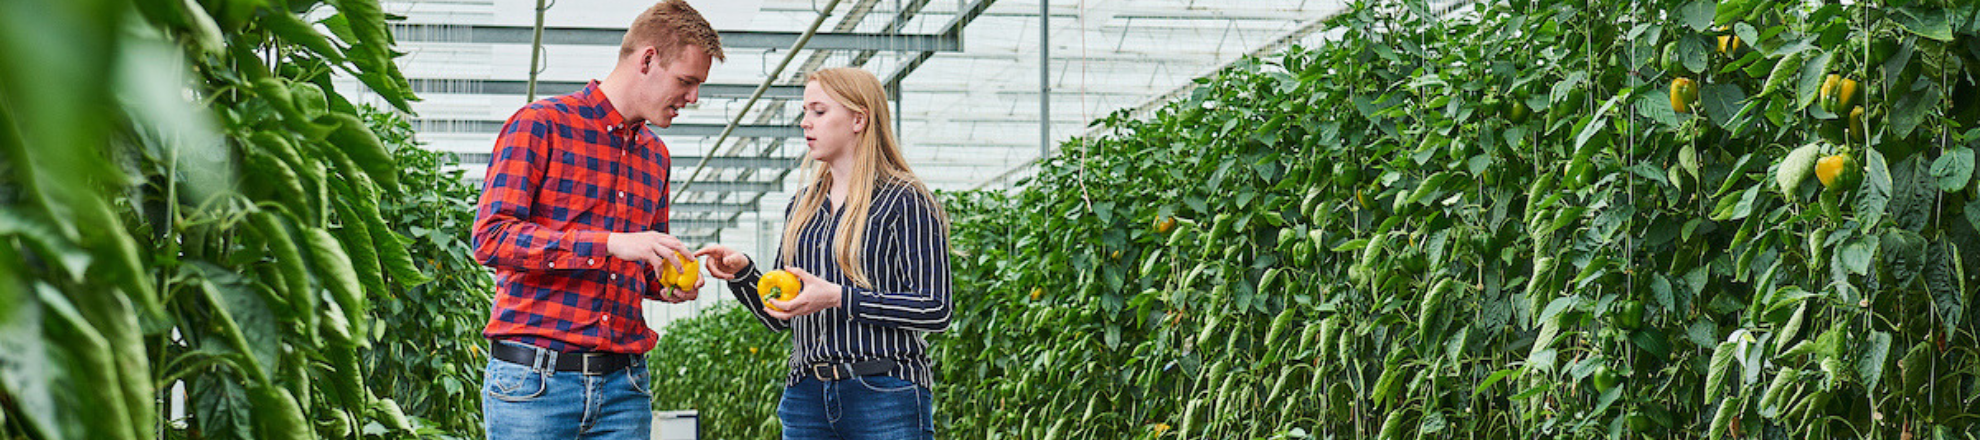 Arable farming students from Aeres University of Applied Sciences in greenhouse with capsicum